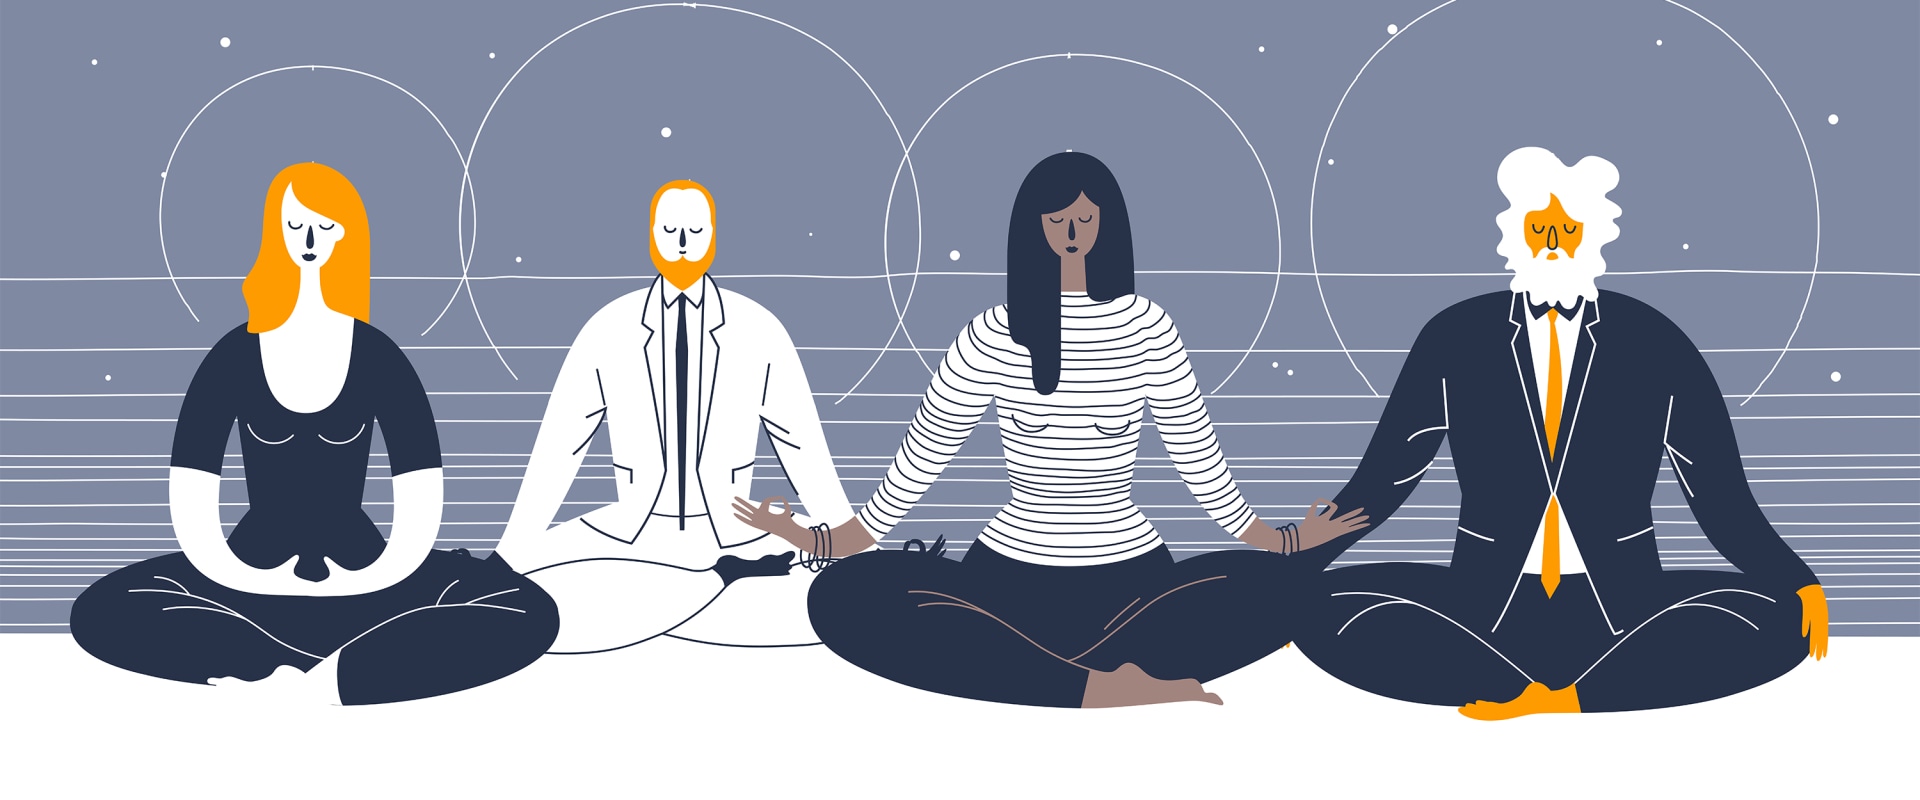 Understanding the Different Types of Mindfulness